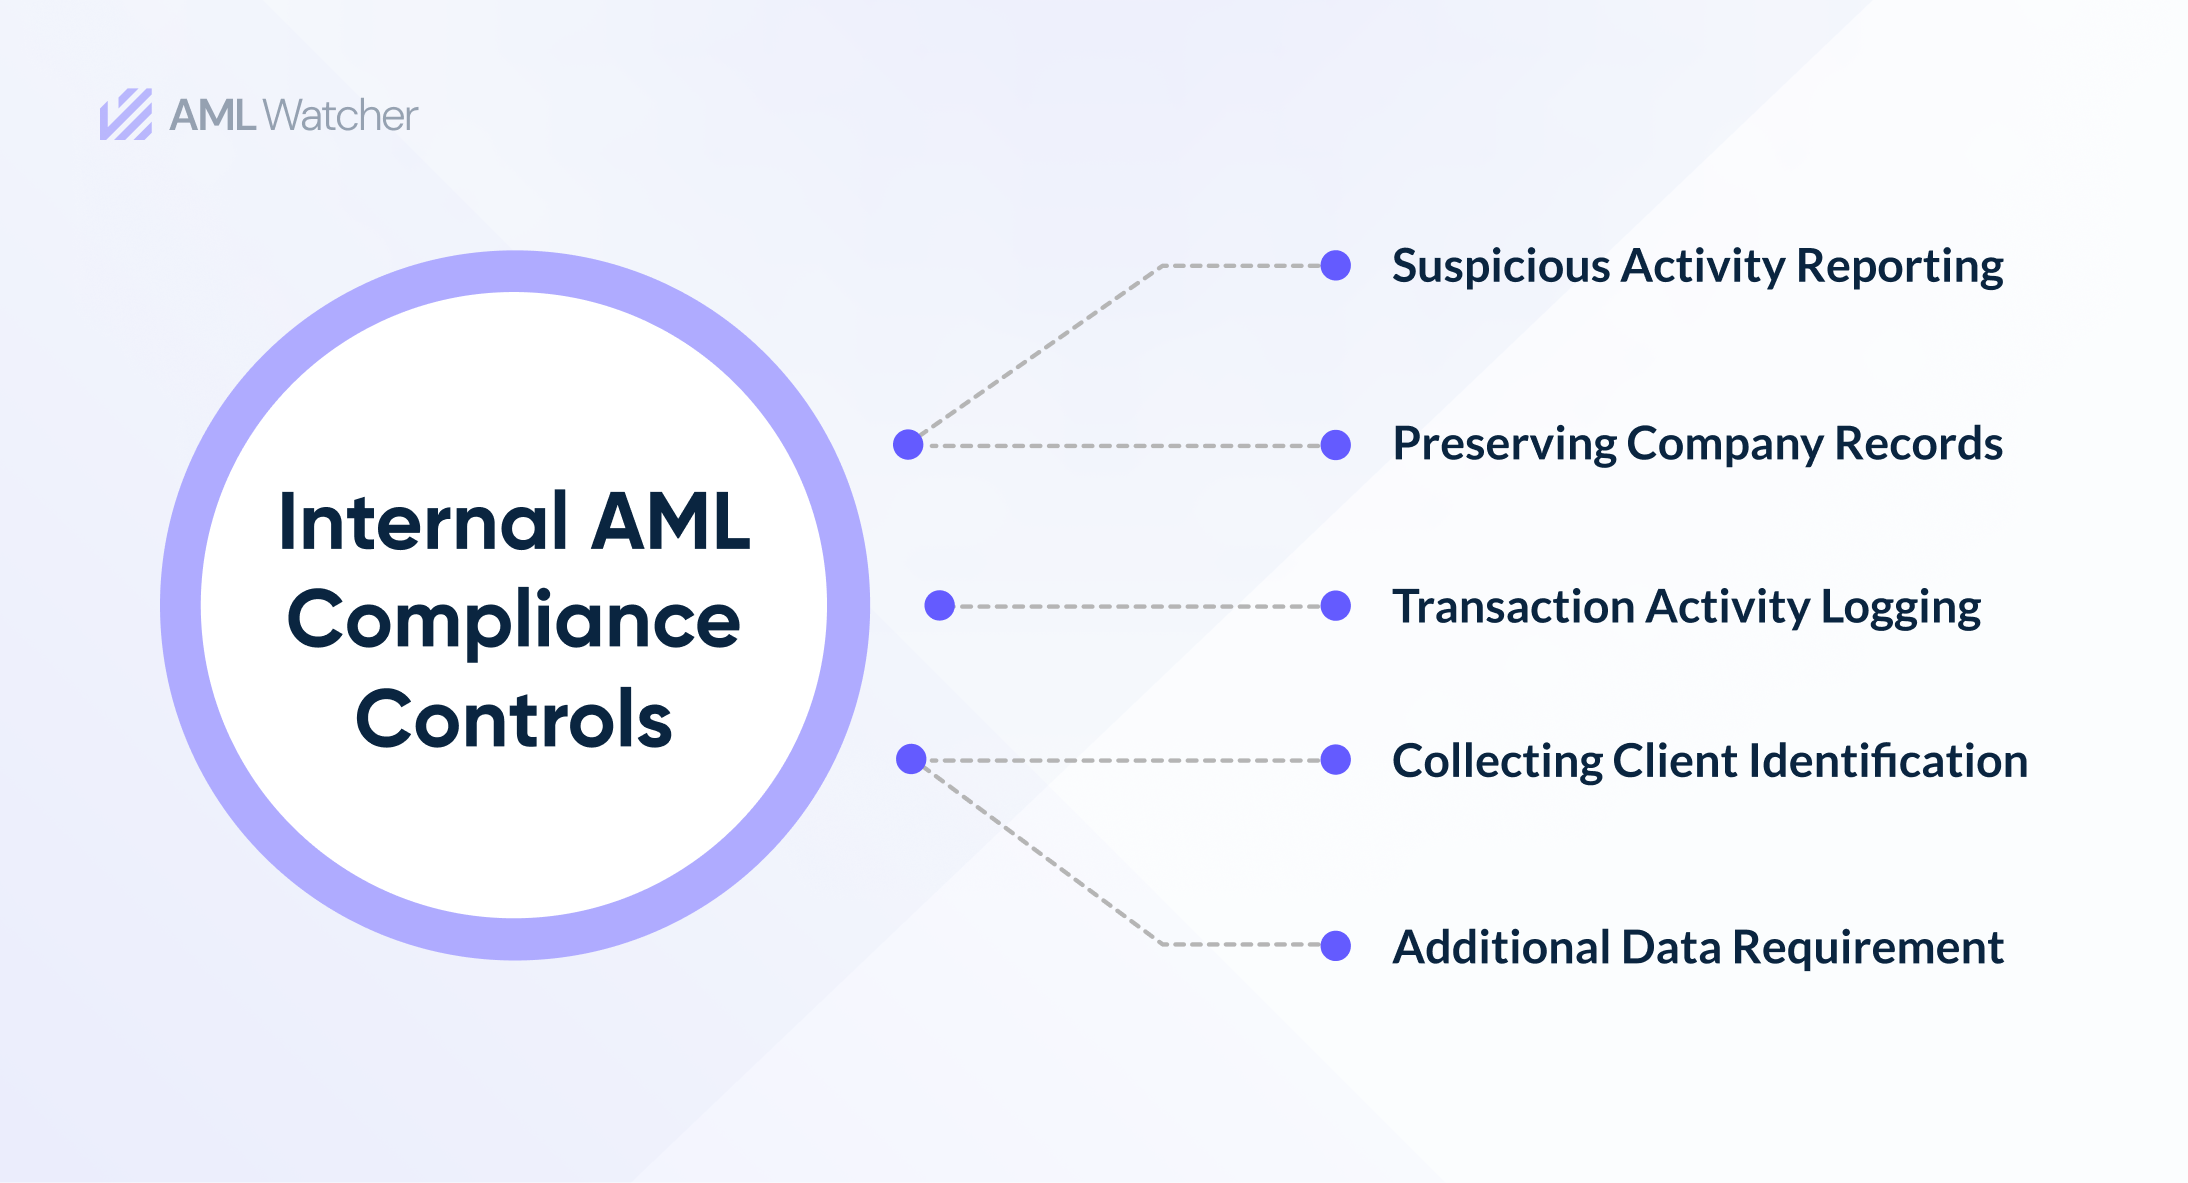 This image shows the impacts of internal AML compliance control measures